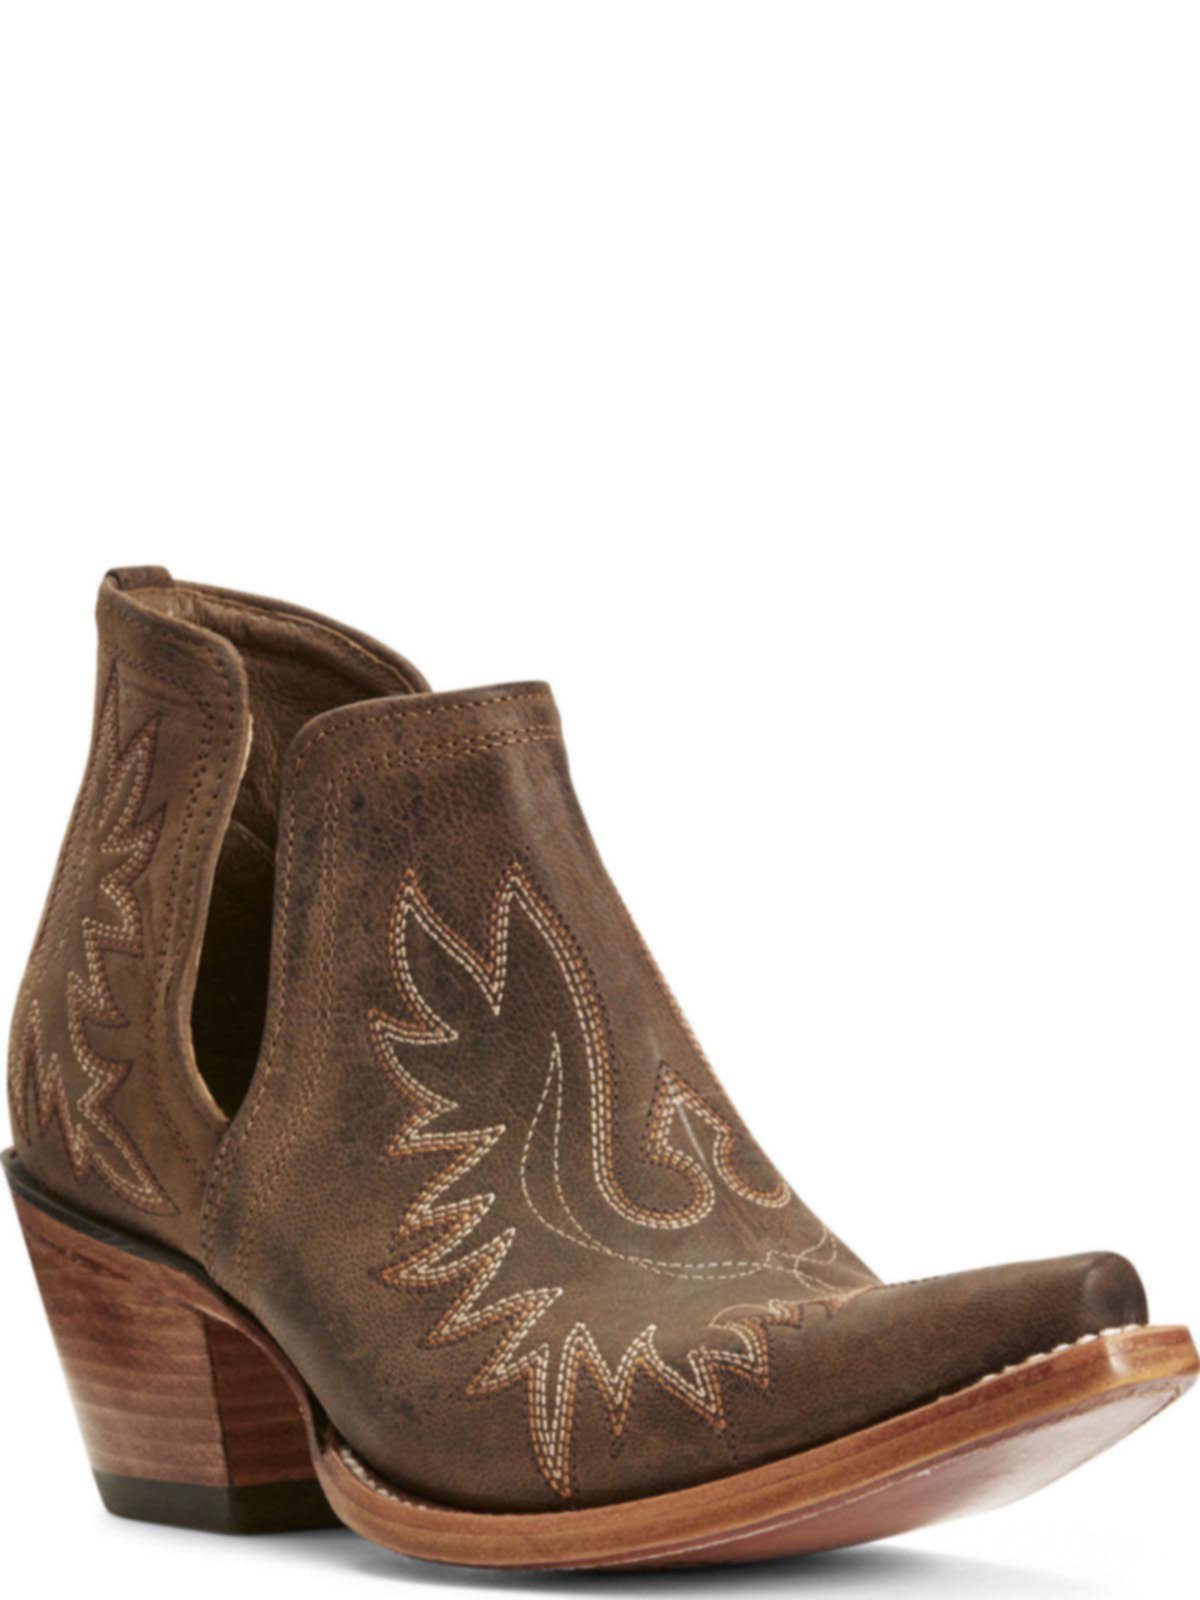 Shop Ariat Womens Dixon Western Ankle Boot 10027282 | Save 25% + Free ...